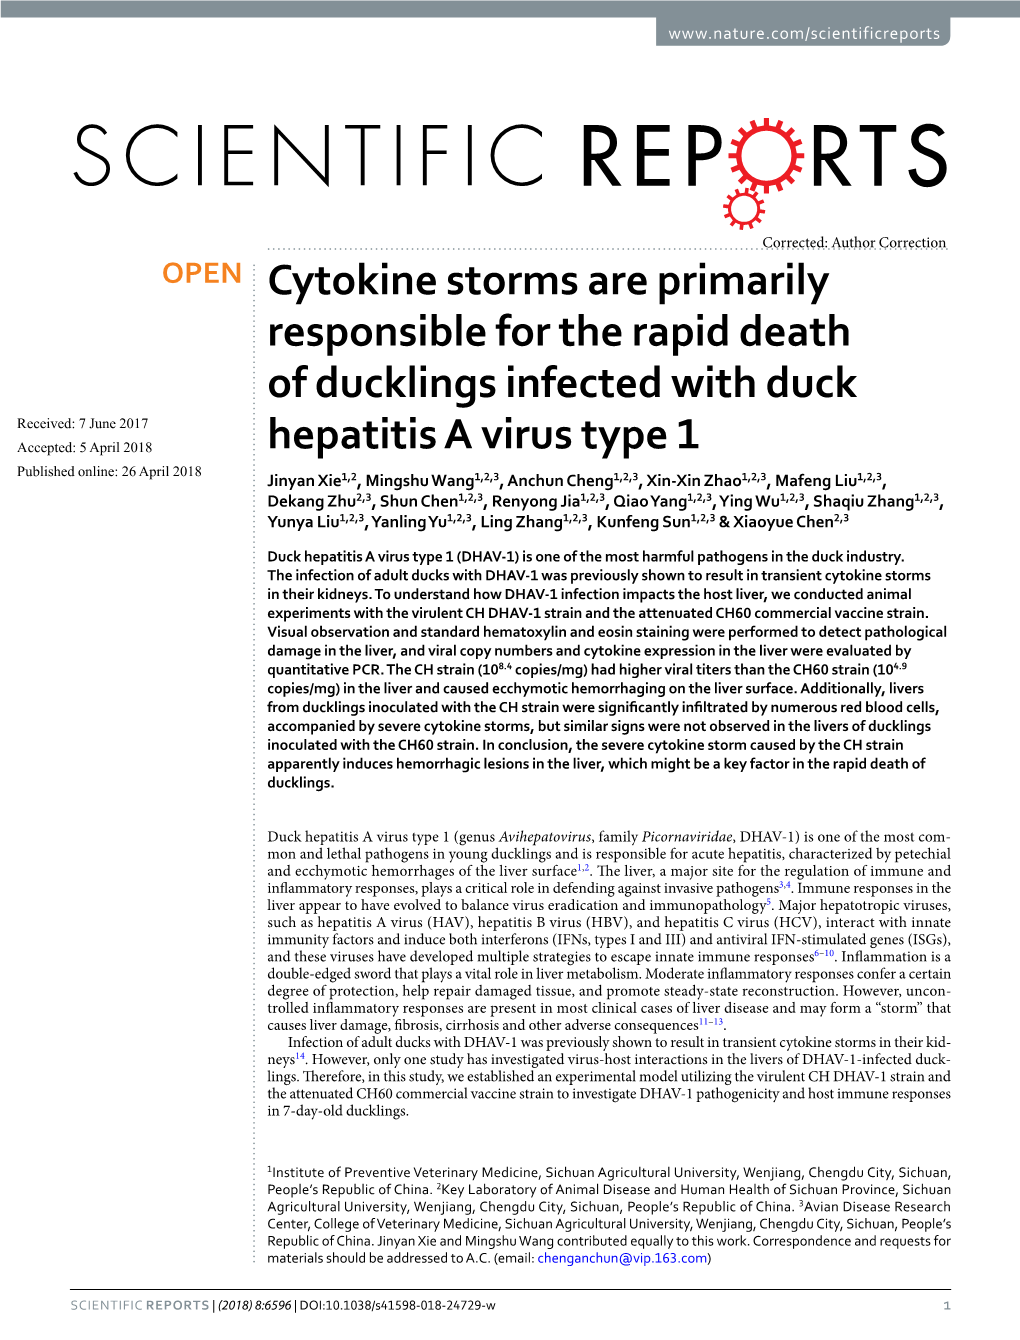 Cytokine Storms Are Primarily Responsible for the Rapid Death of Ducklings Infected with Duck Hepatitis a Virus Type 1